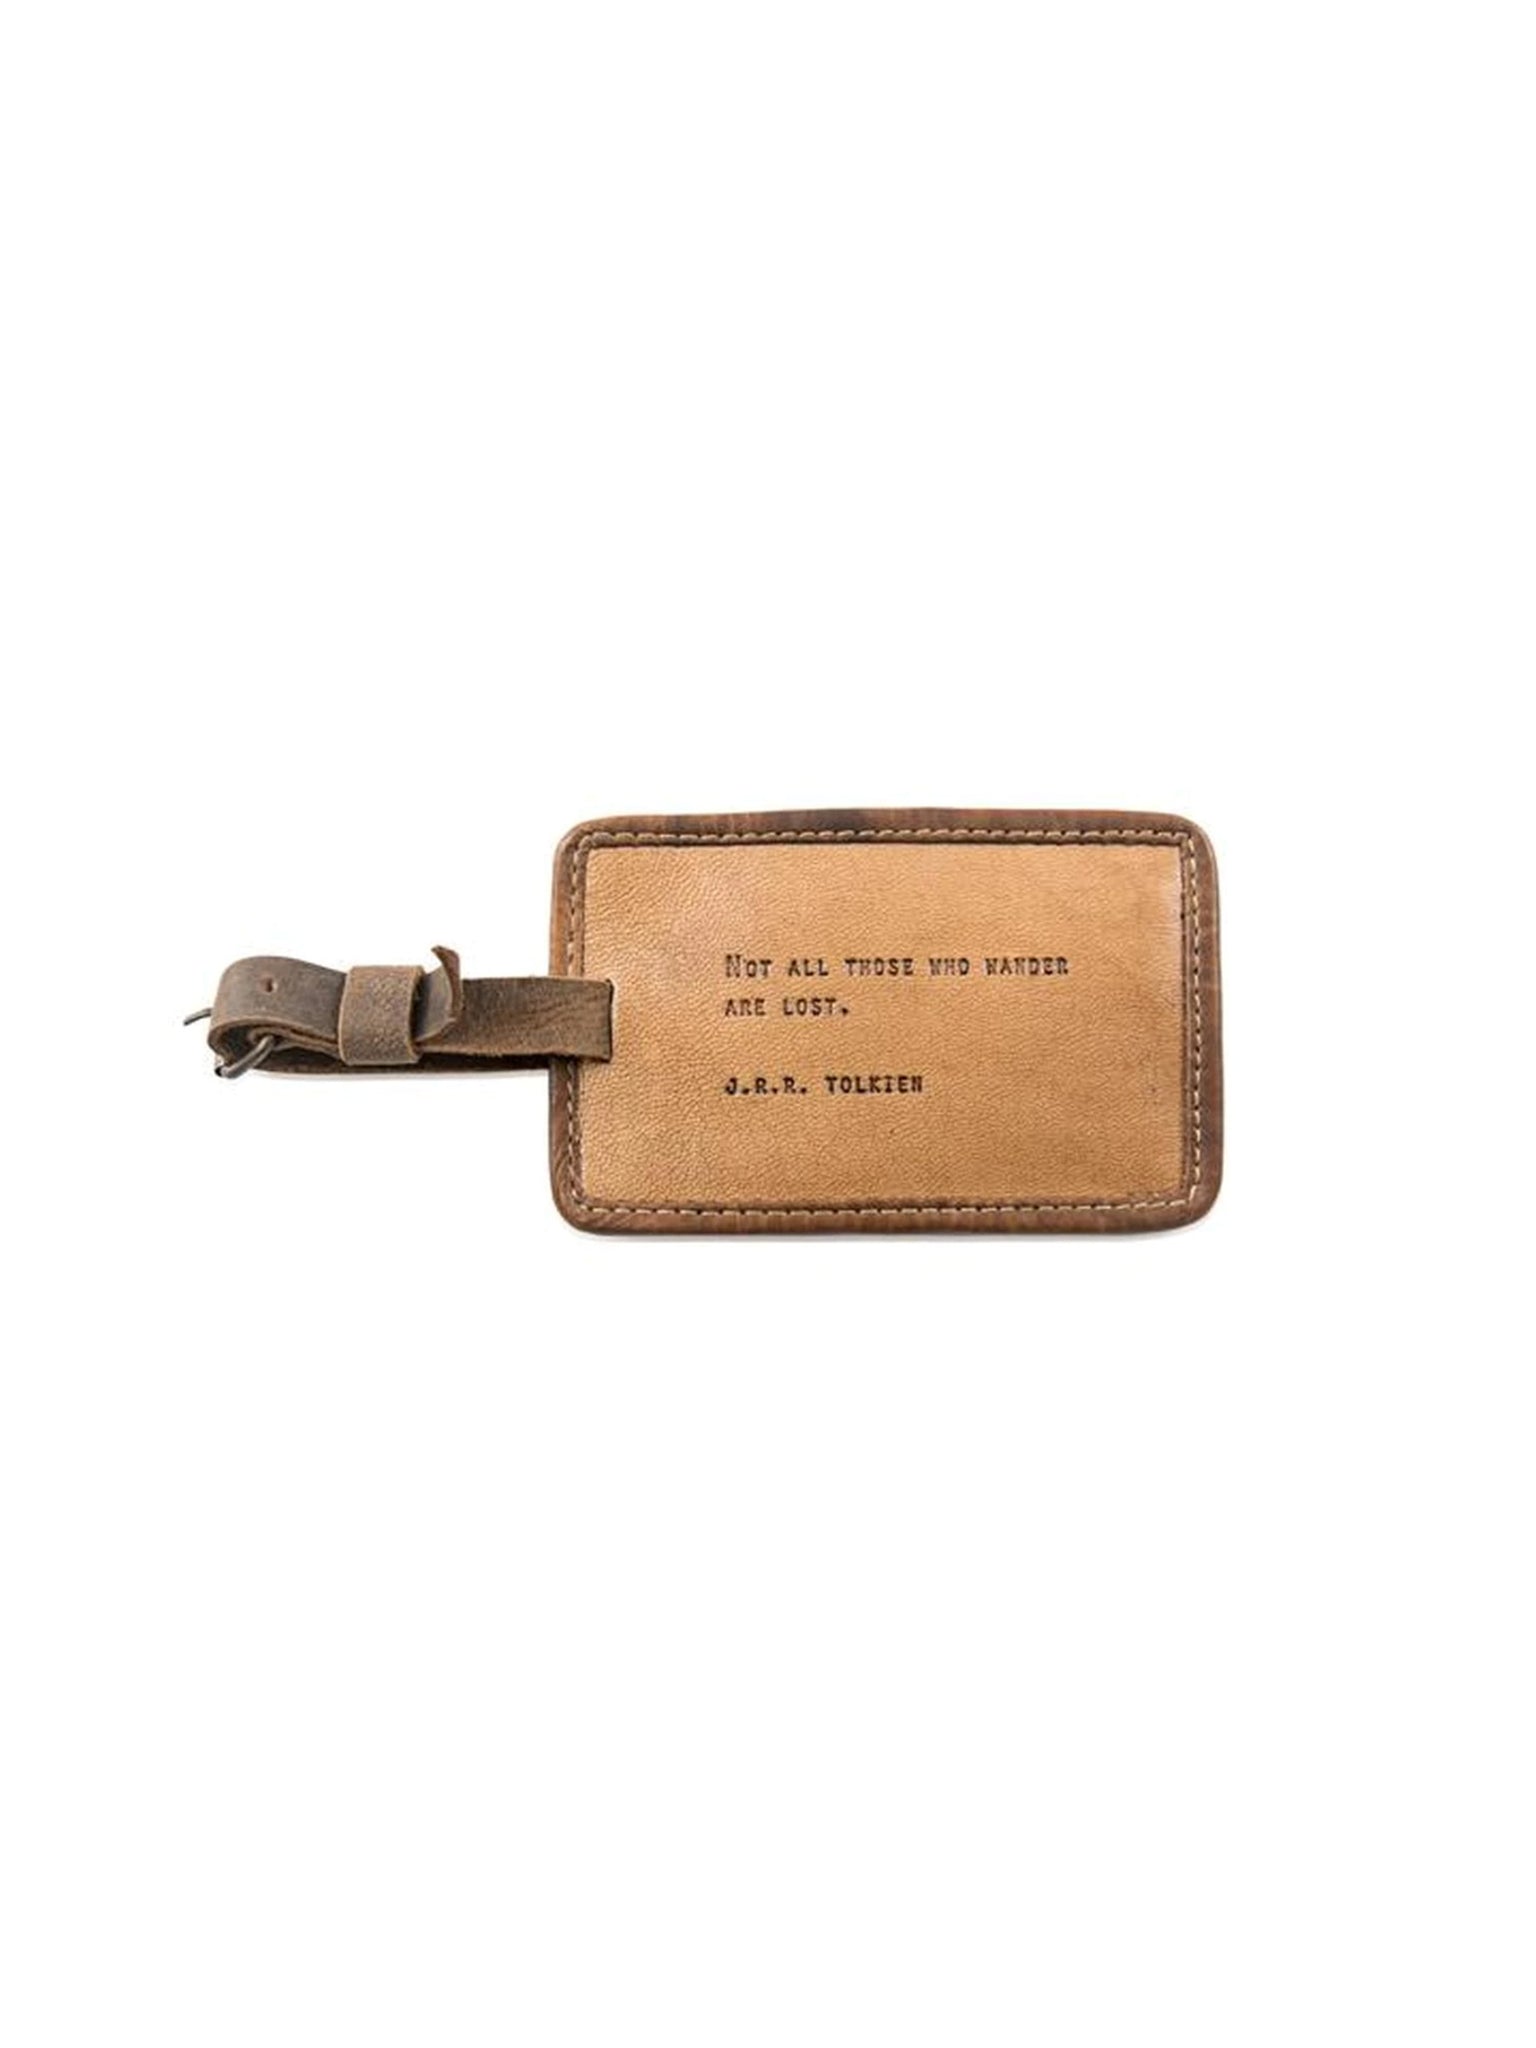 Sugarboo Leather Luggage Tag JRR Tolkein Weston Table